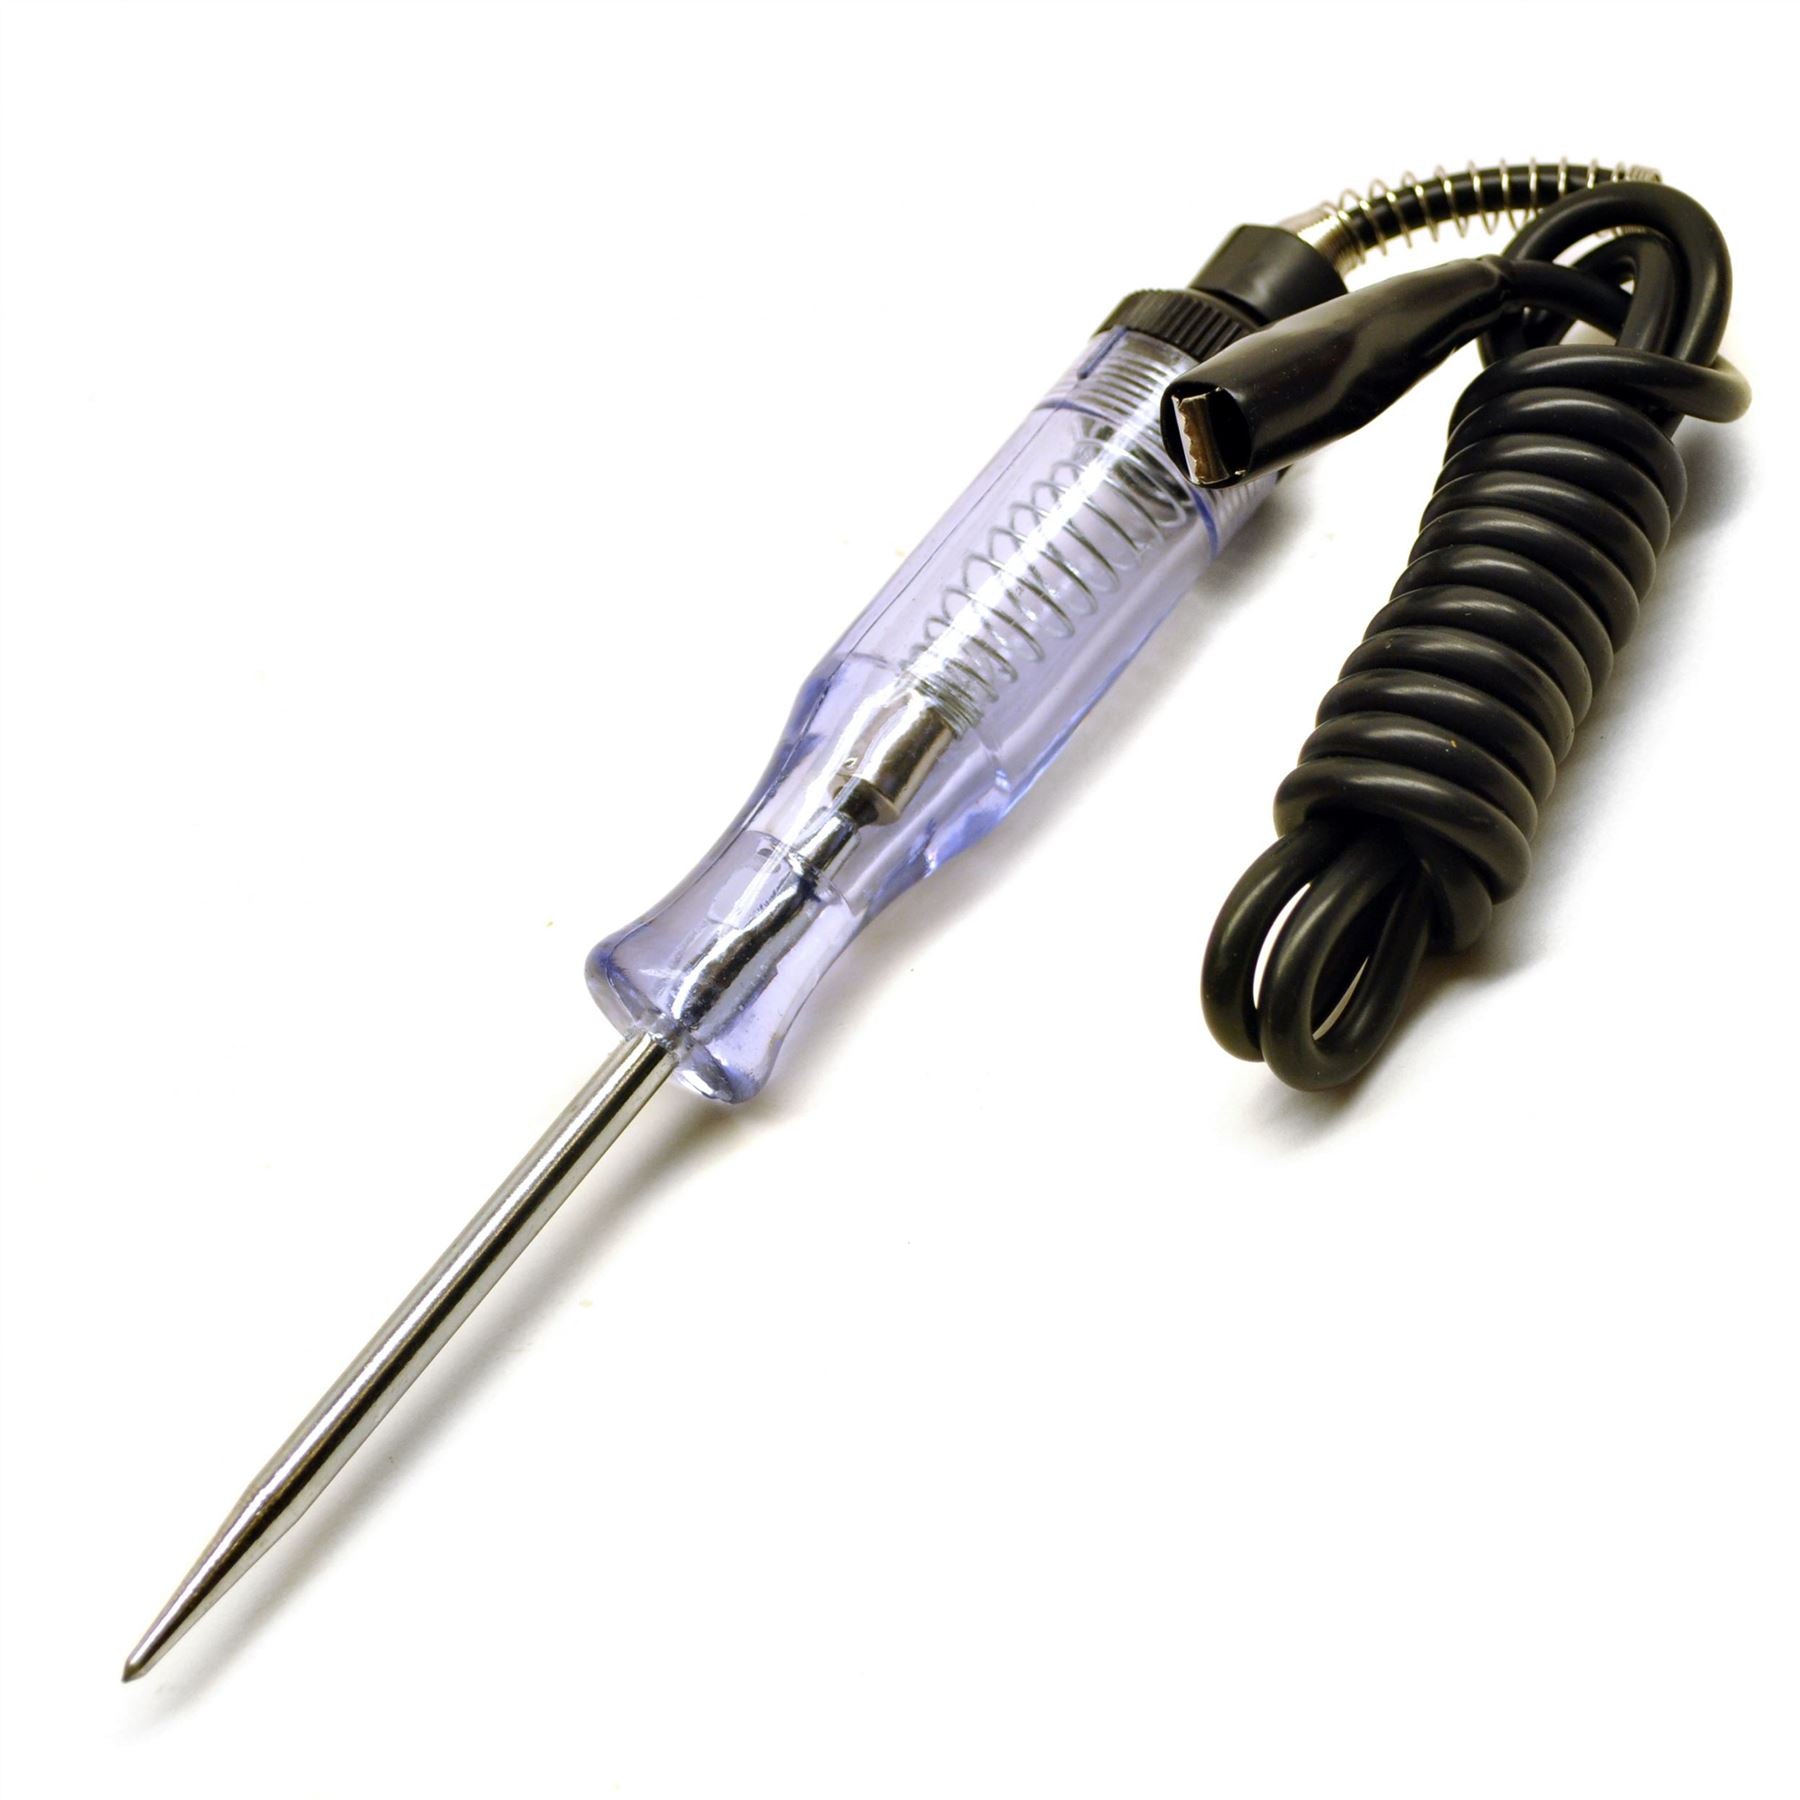 Plastic Finger Saver Wire Piercing Guide Circuit Tester Electric